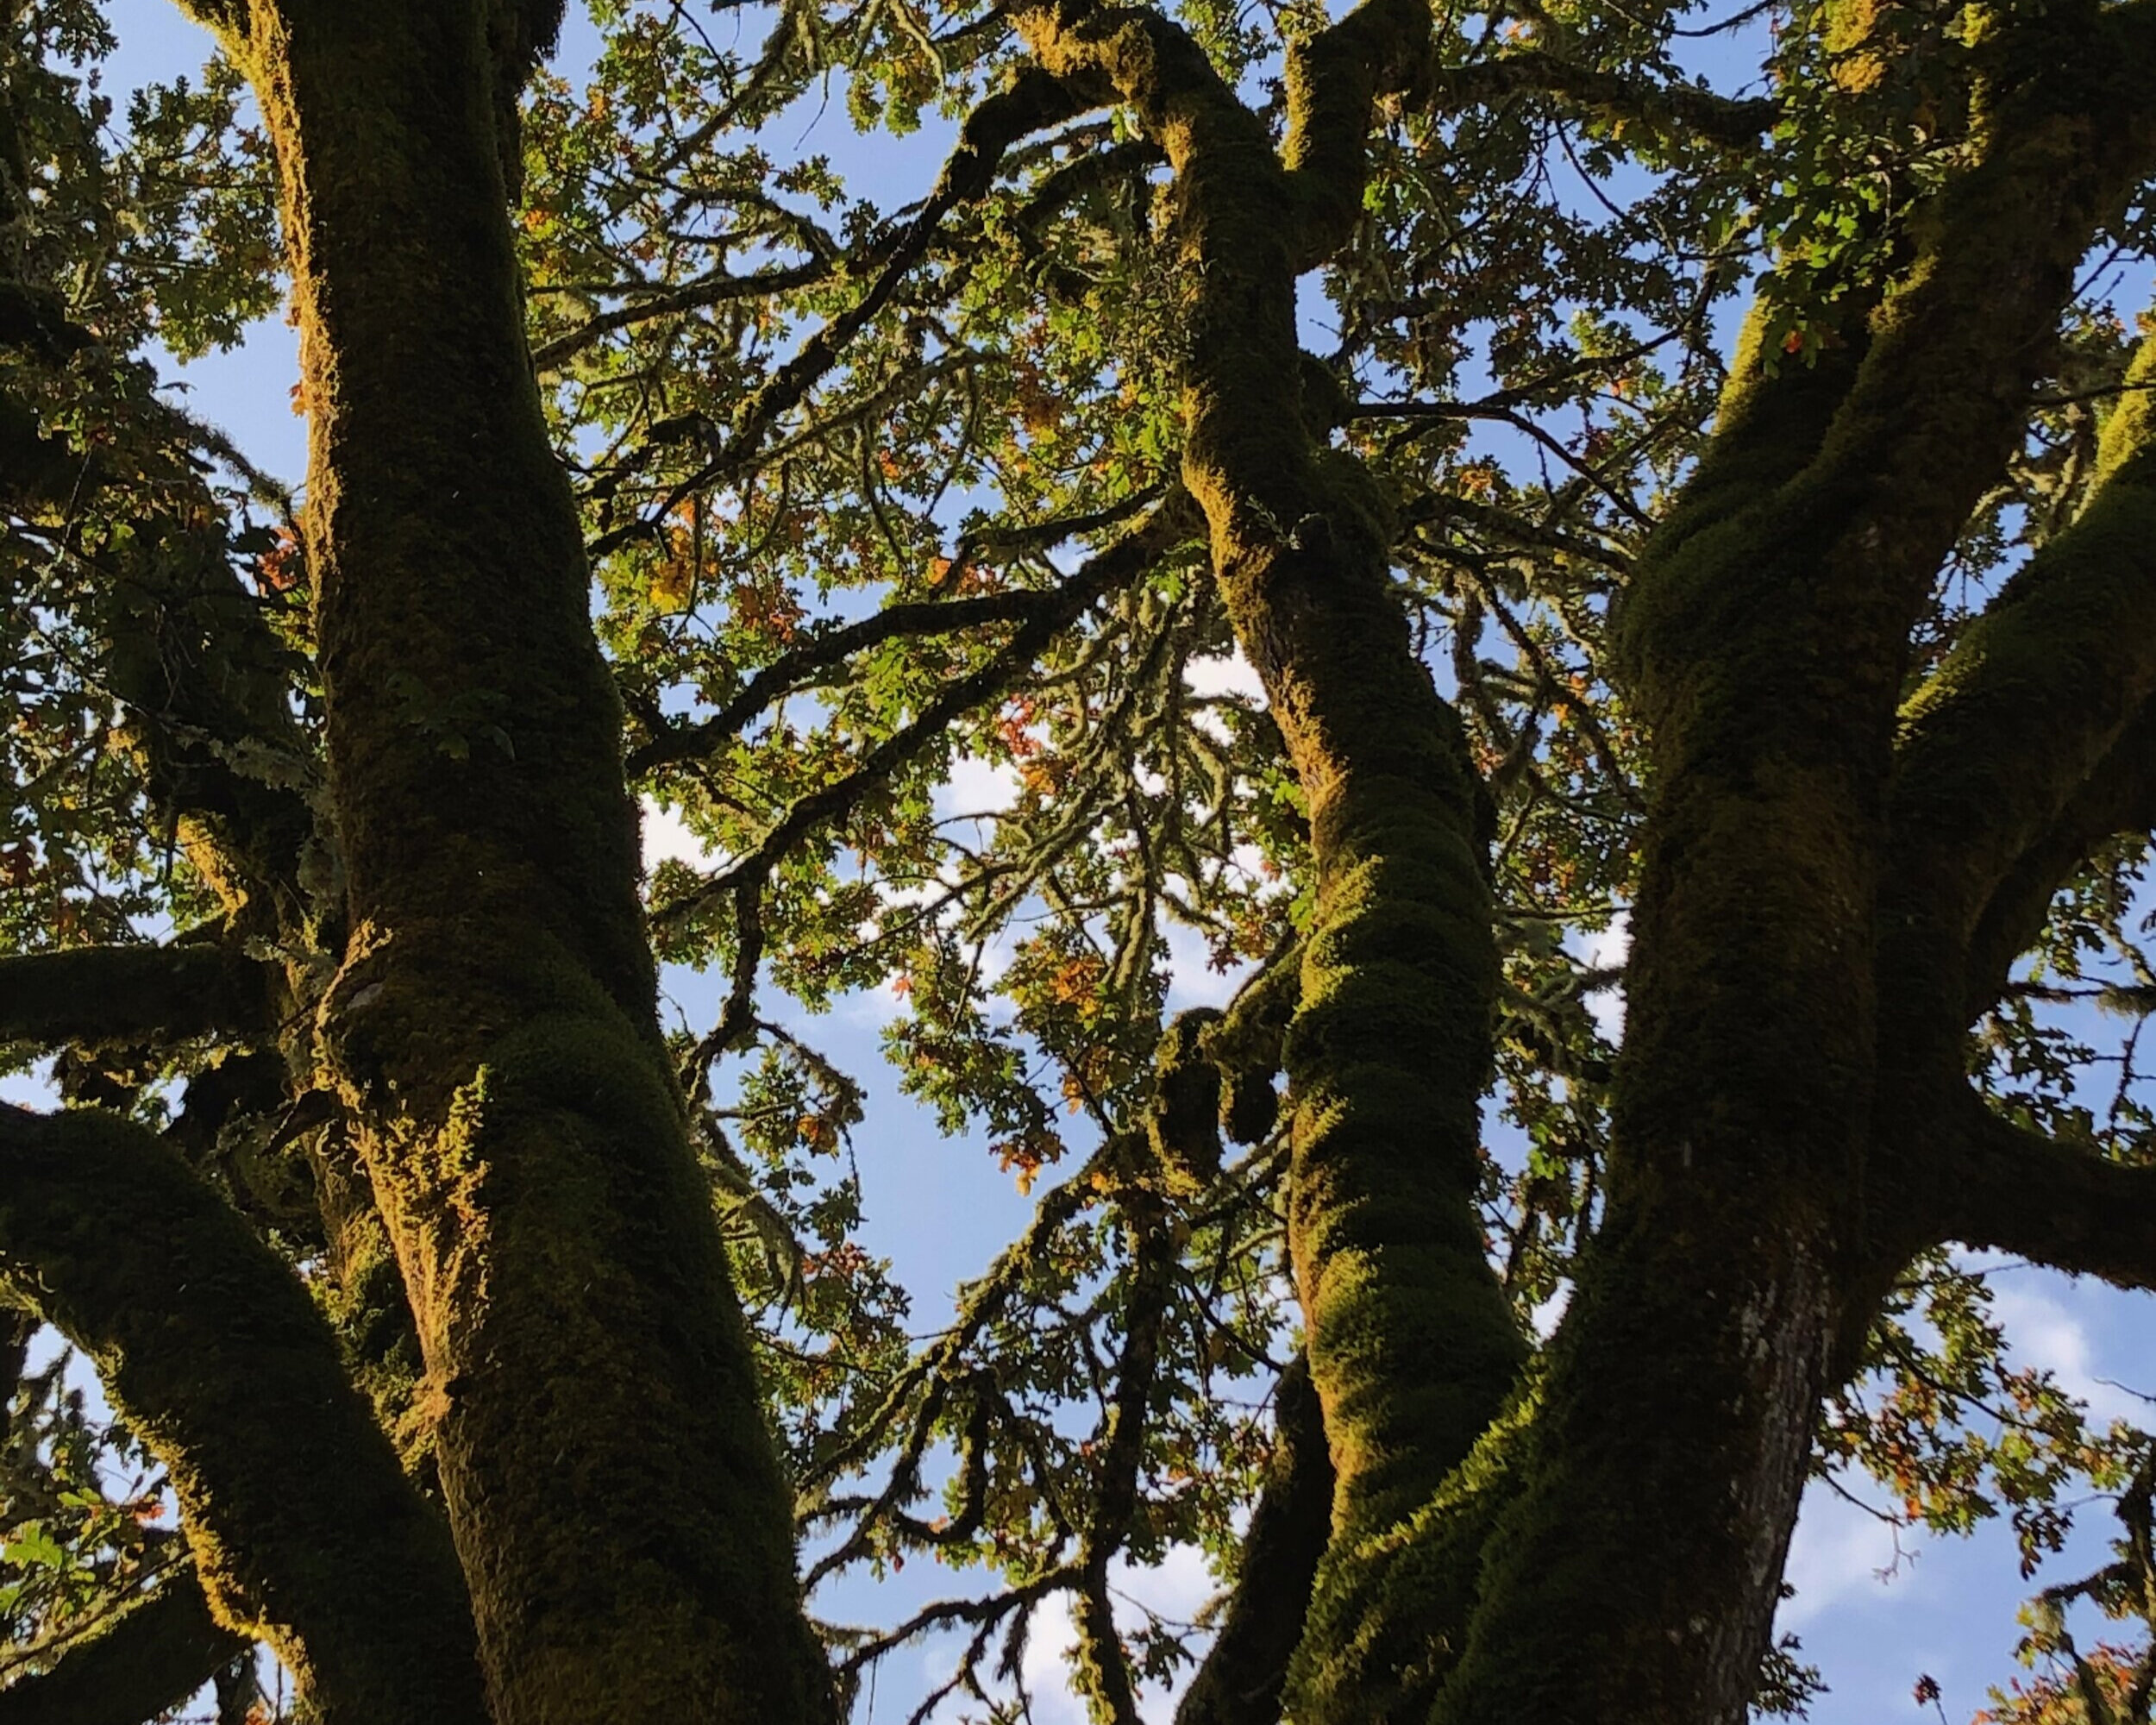  These majestic, expansive trees are generally covered with as many as a hundred species of vibrant, lush mosses and lichens, providing rich, diverse habitats and food sources for numerous plants, insects, birds, and other creatures… 